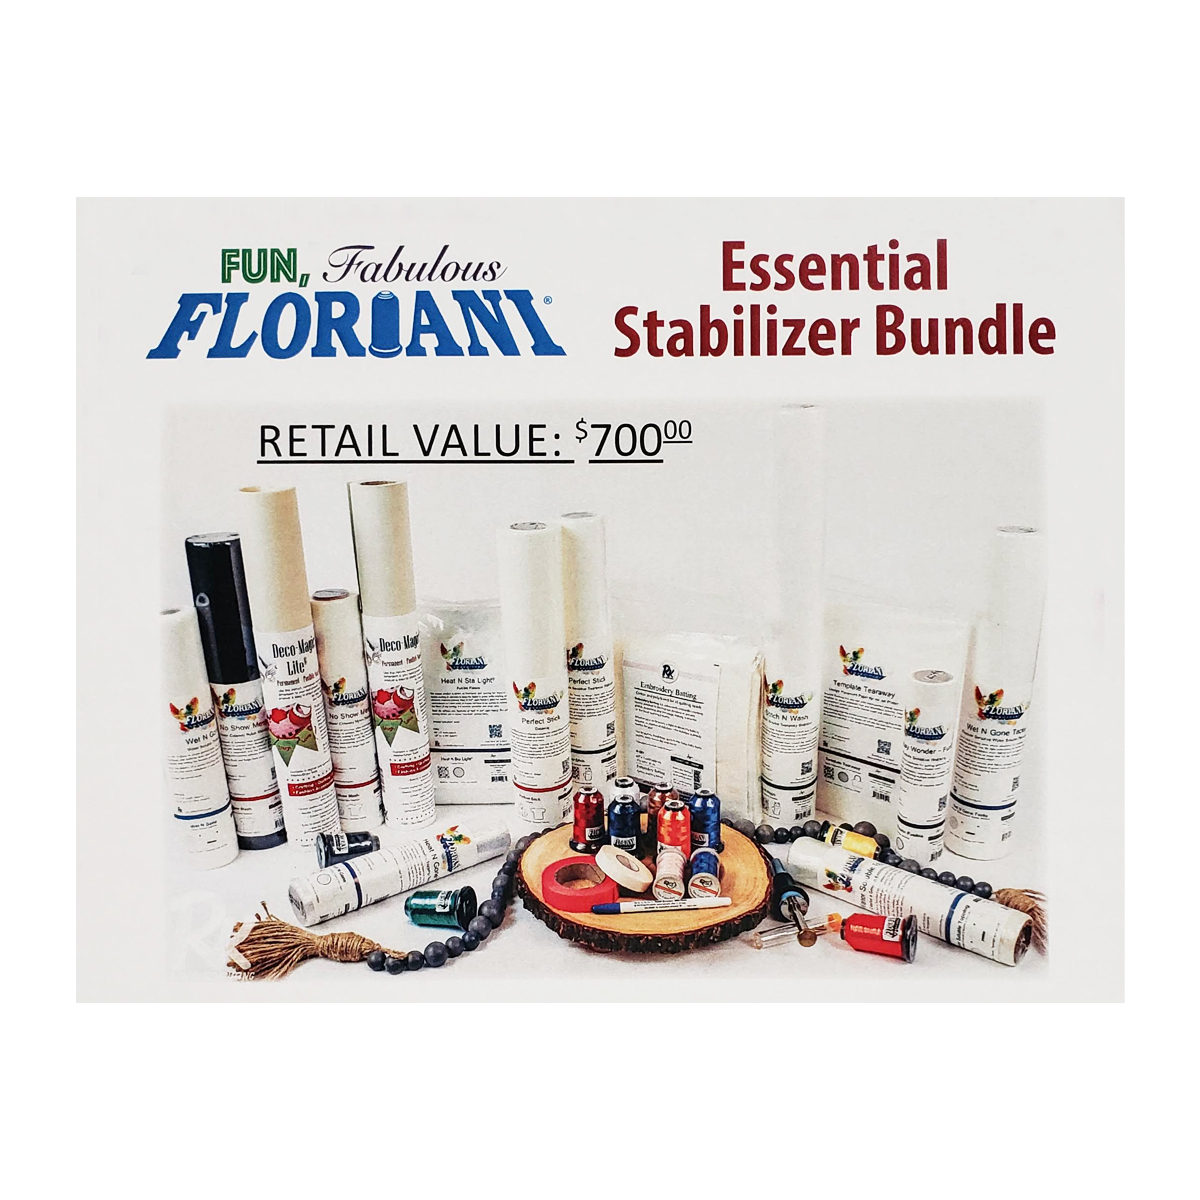 Floriani Tearaway Medium Embroidery Stabilizer - Moore's Sewing